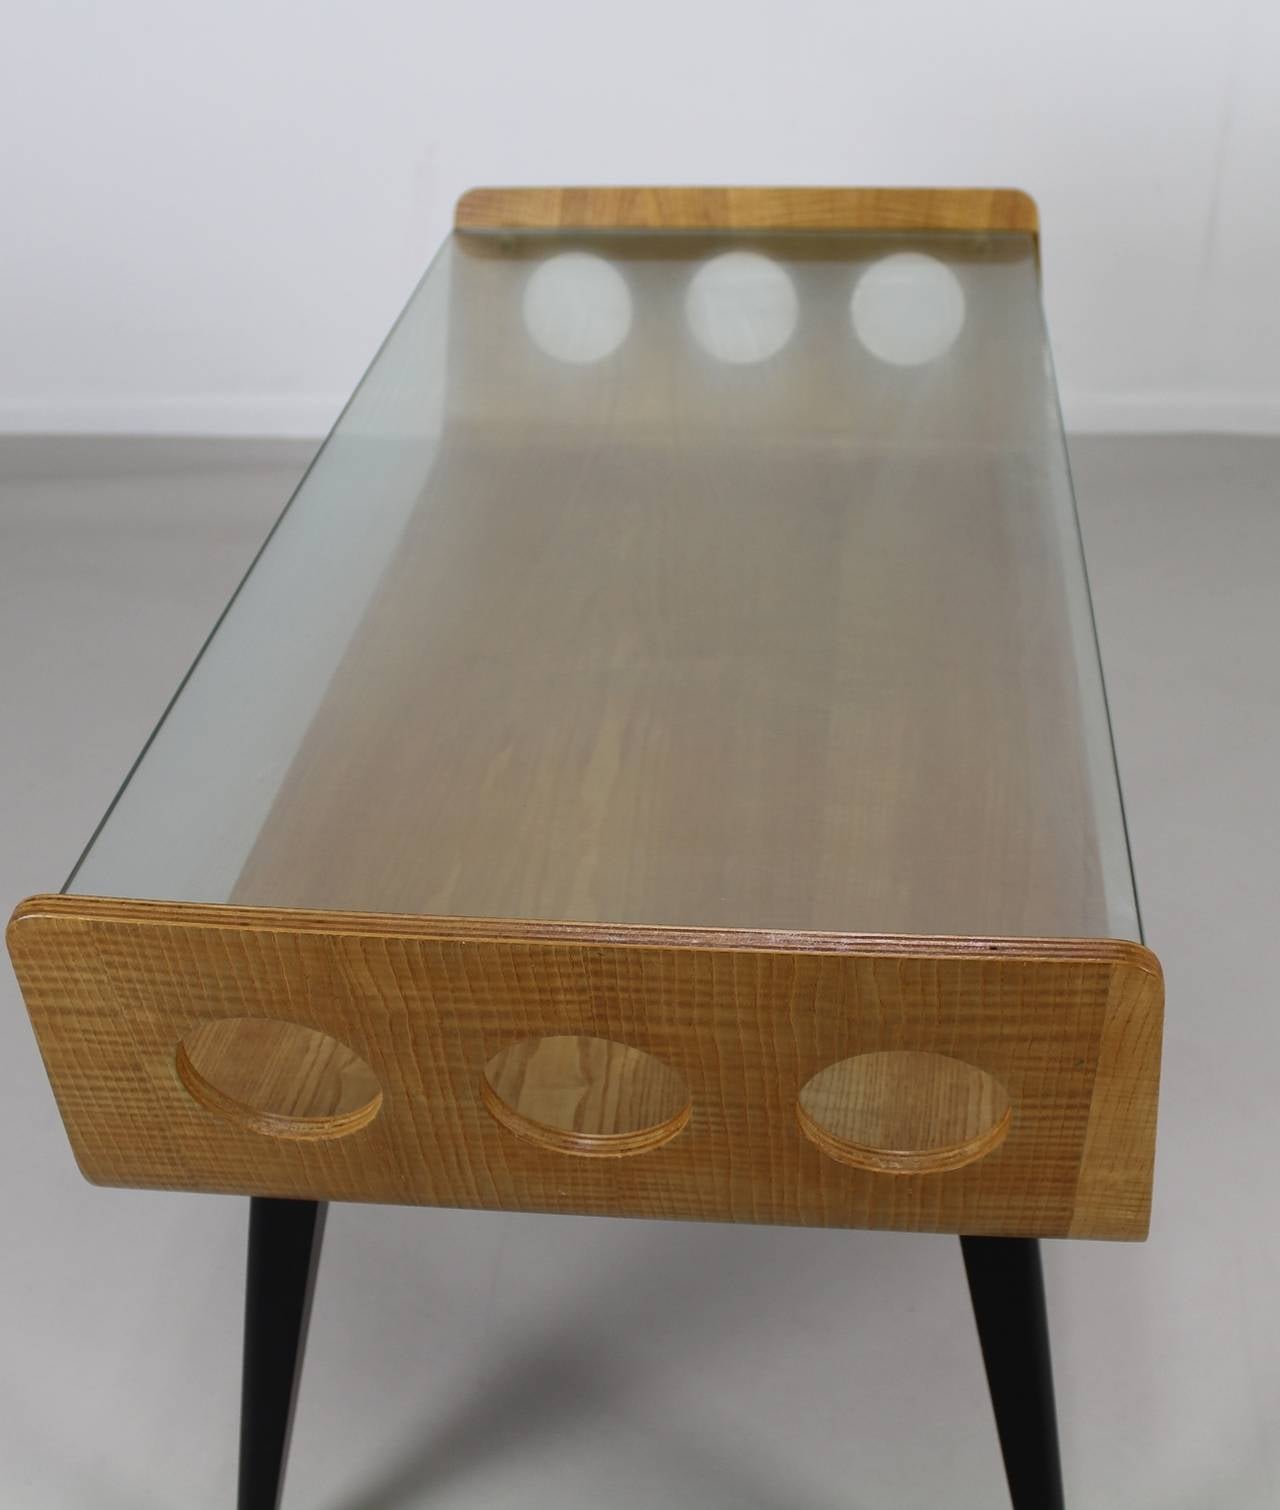 Dutch Design 1950s Bentwood Coffee Table with Glass Top In Good Condition For Sale In Staphorst, NL